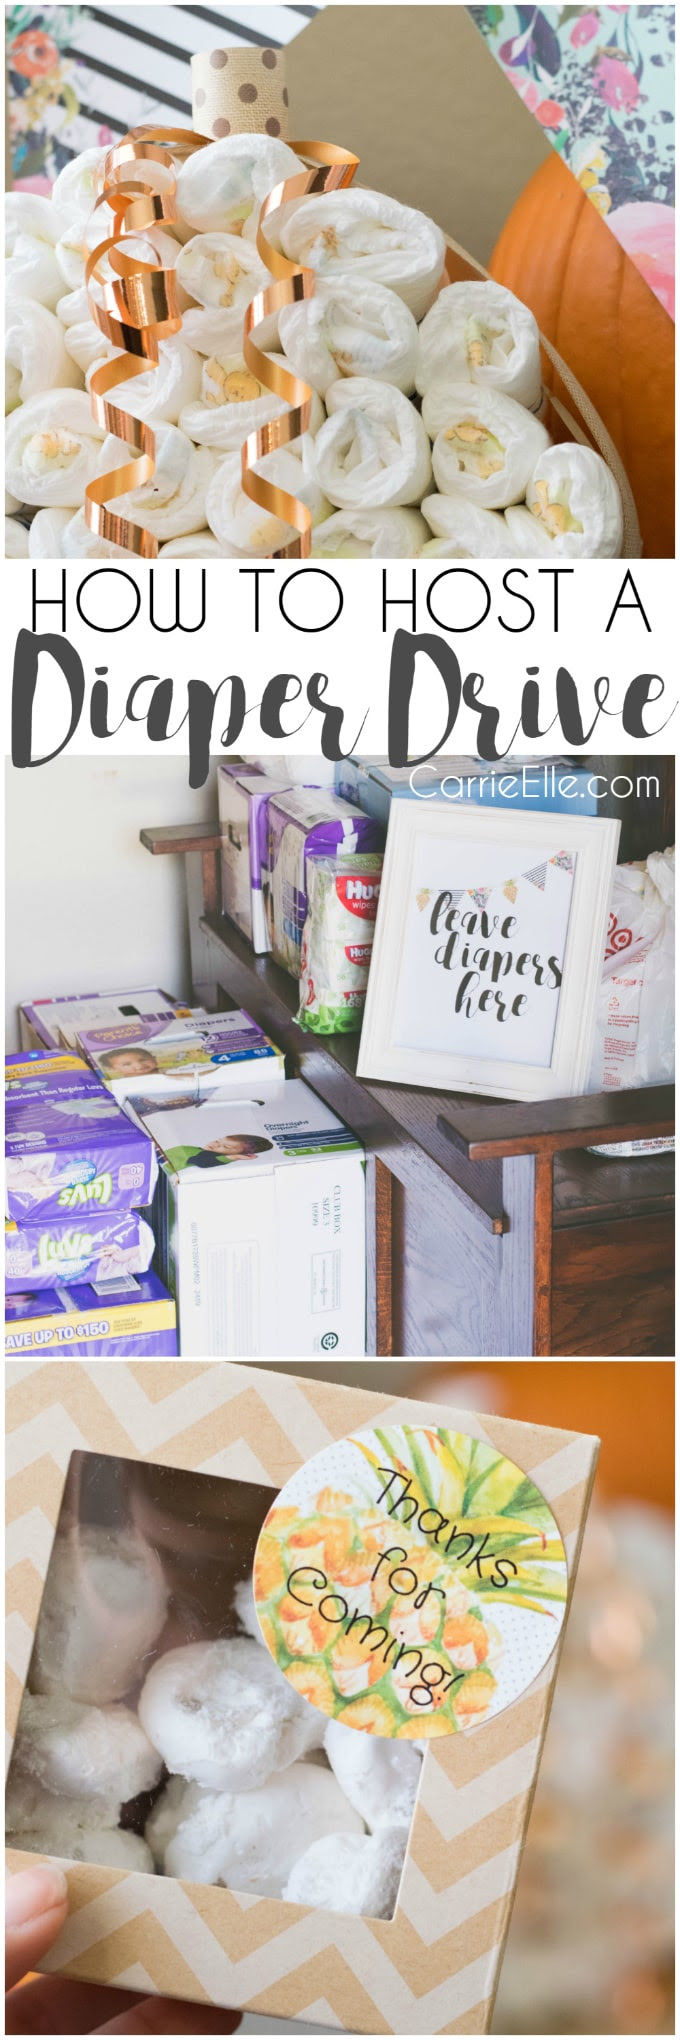 How to Host a Diaper Drive (or just donate...or get help with diapers if you need it!) Carrie Elle